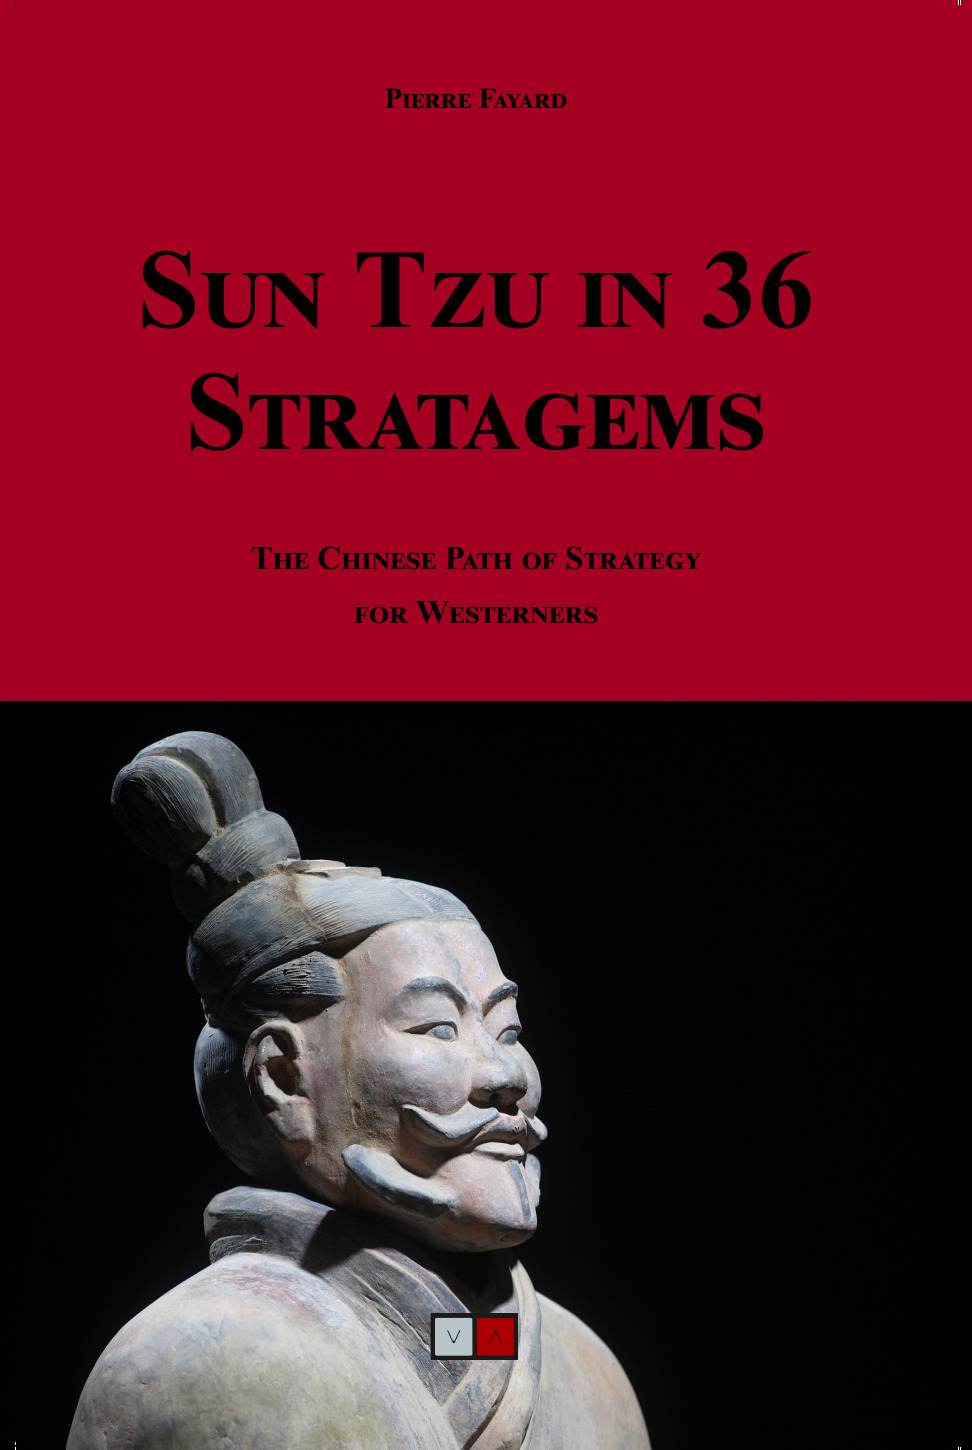 36 traditional Chinese stratagems adapted to “corporate warriors”